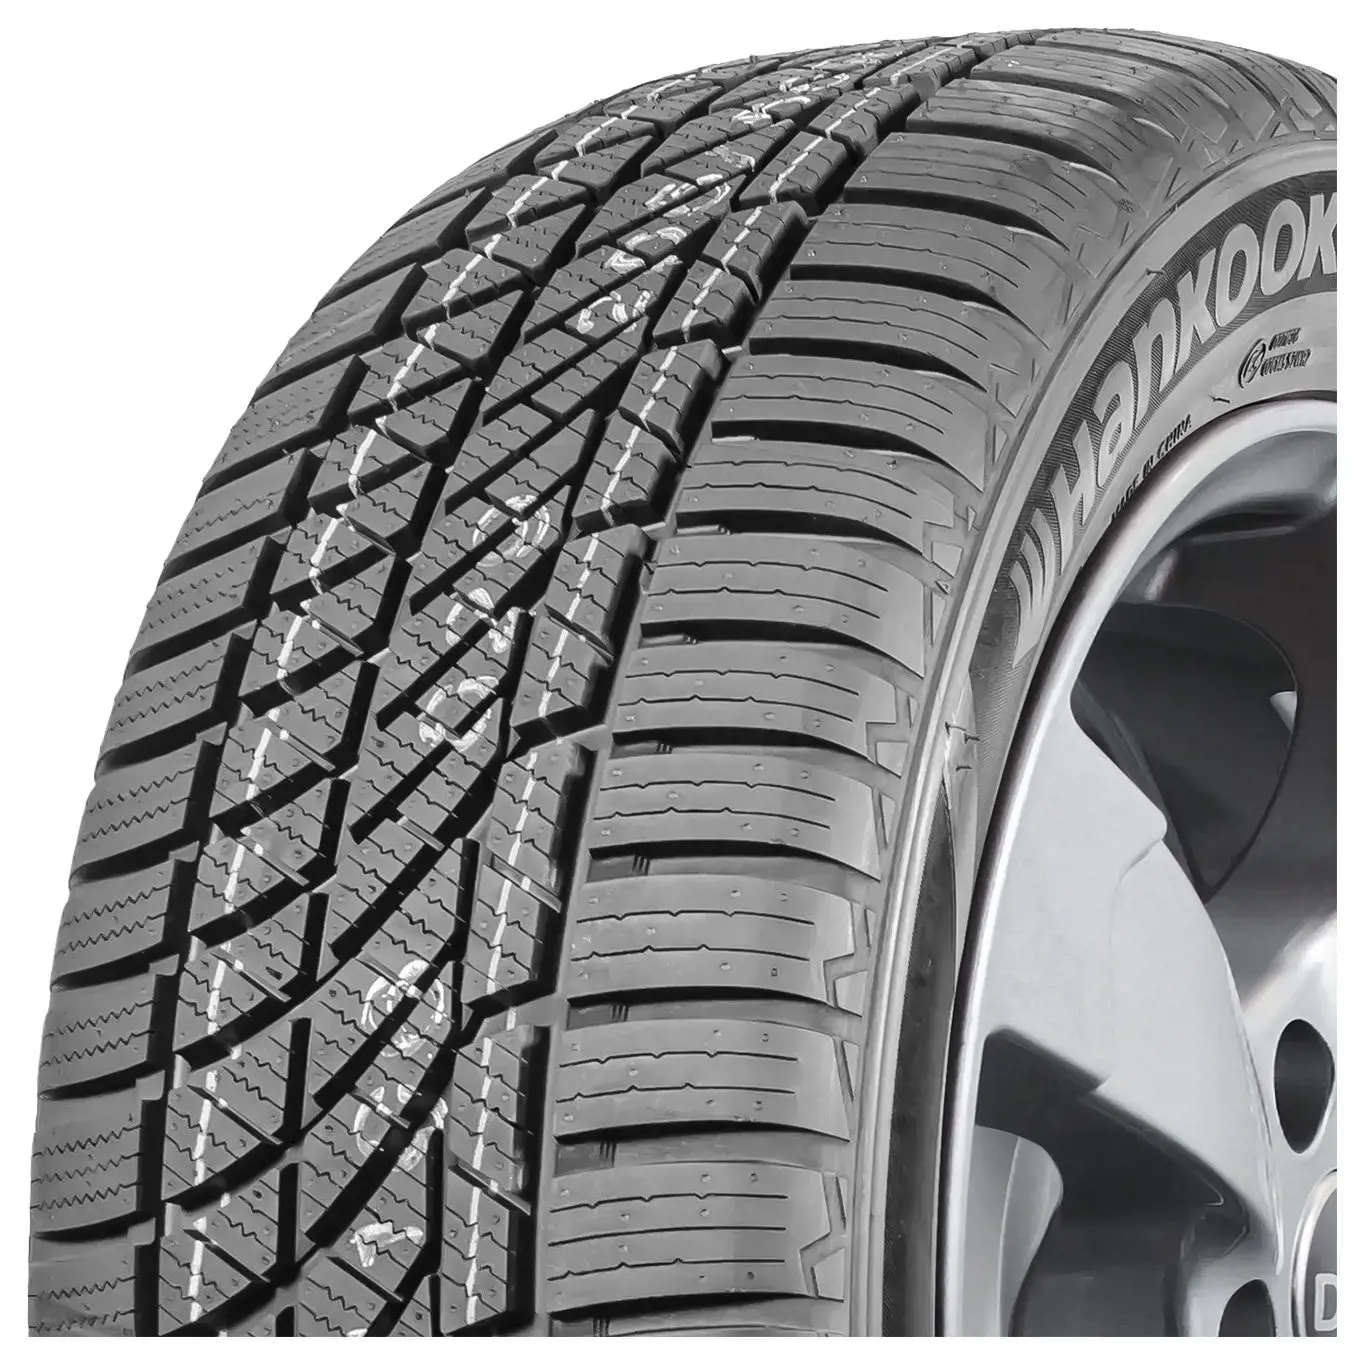 145/70 R13 71T Kinergy 4S H740 SP M+S